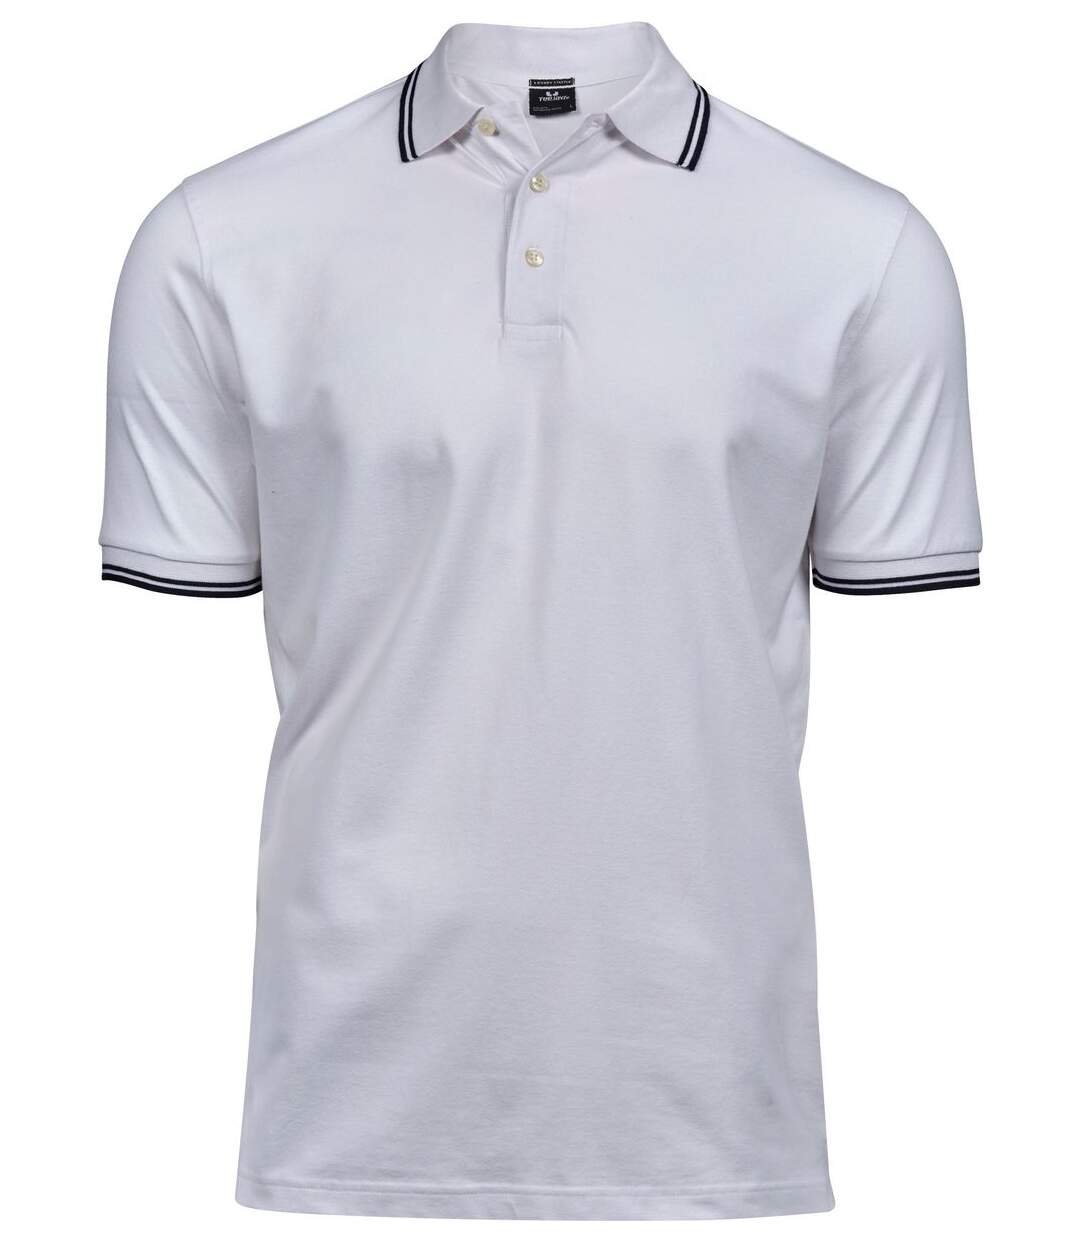 Polo homme Luxury Stripe Stretch - 1407 - blanc - manches courtes